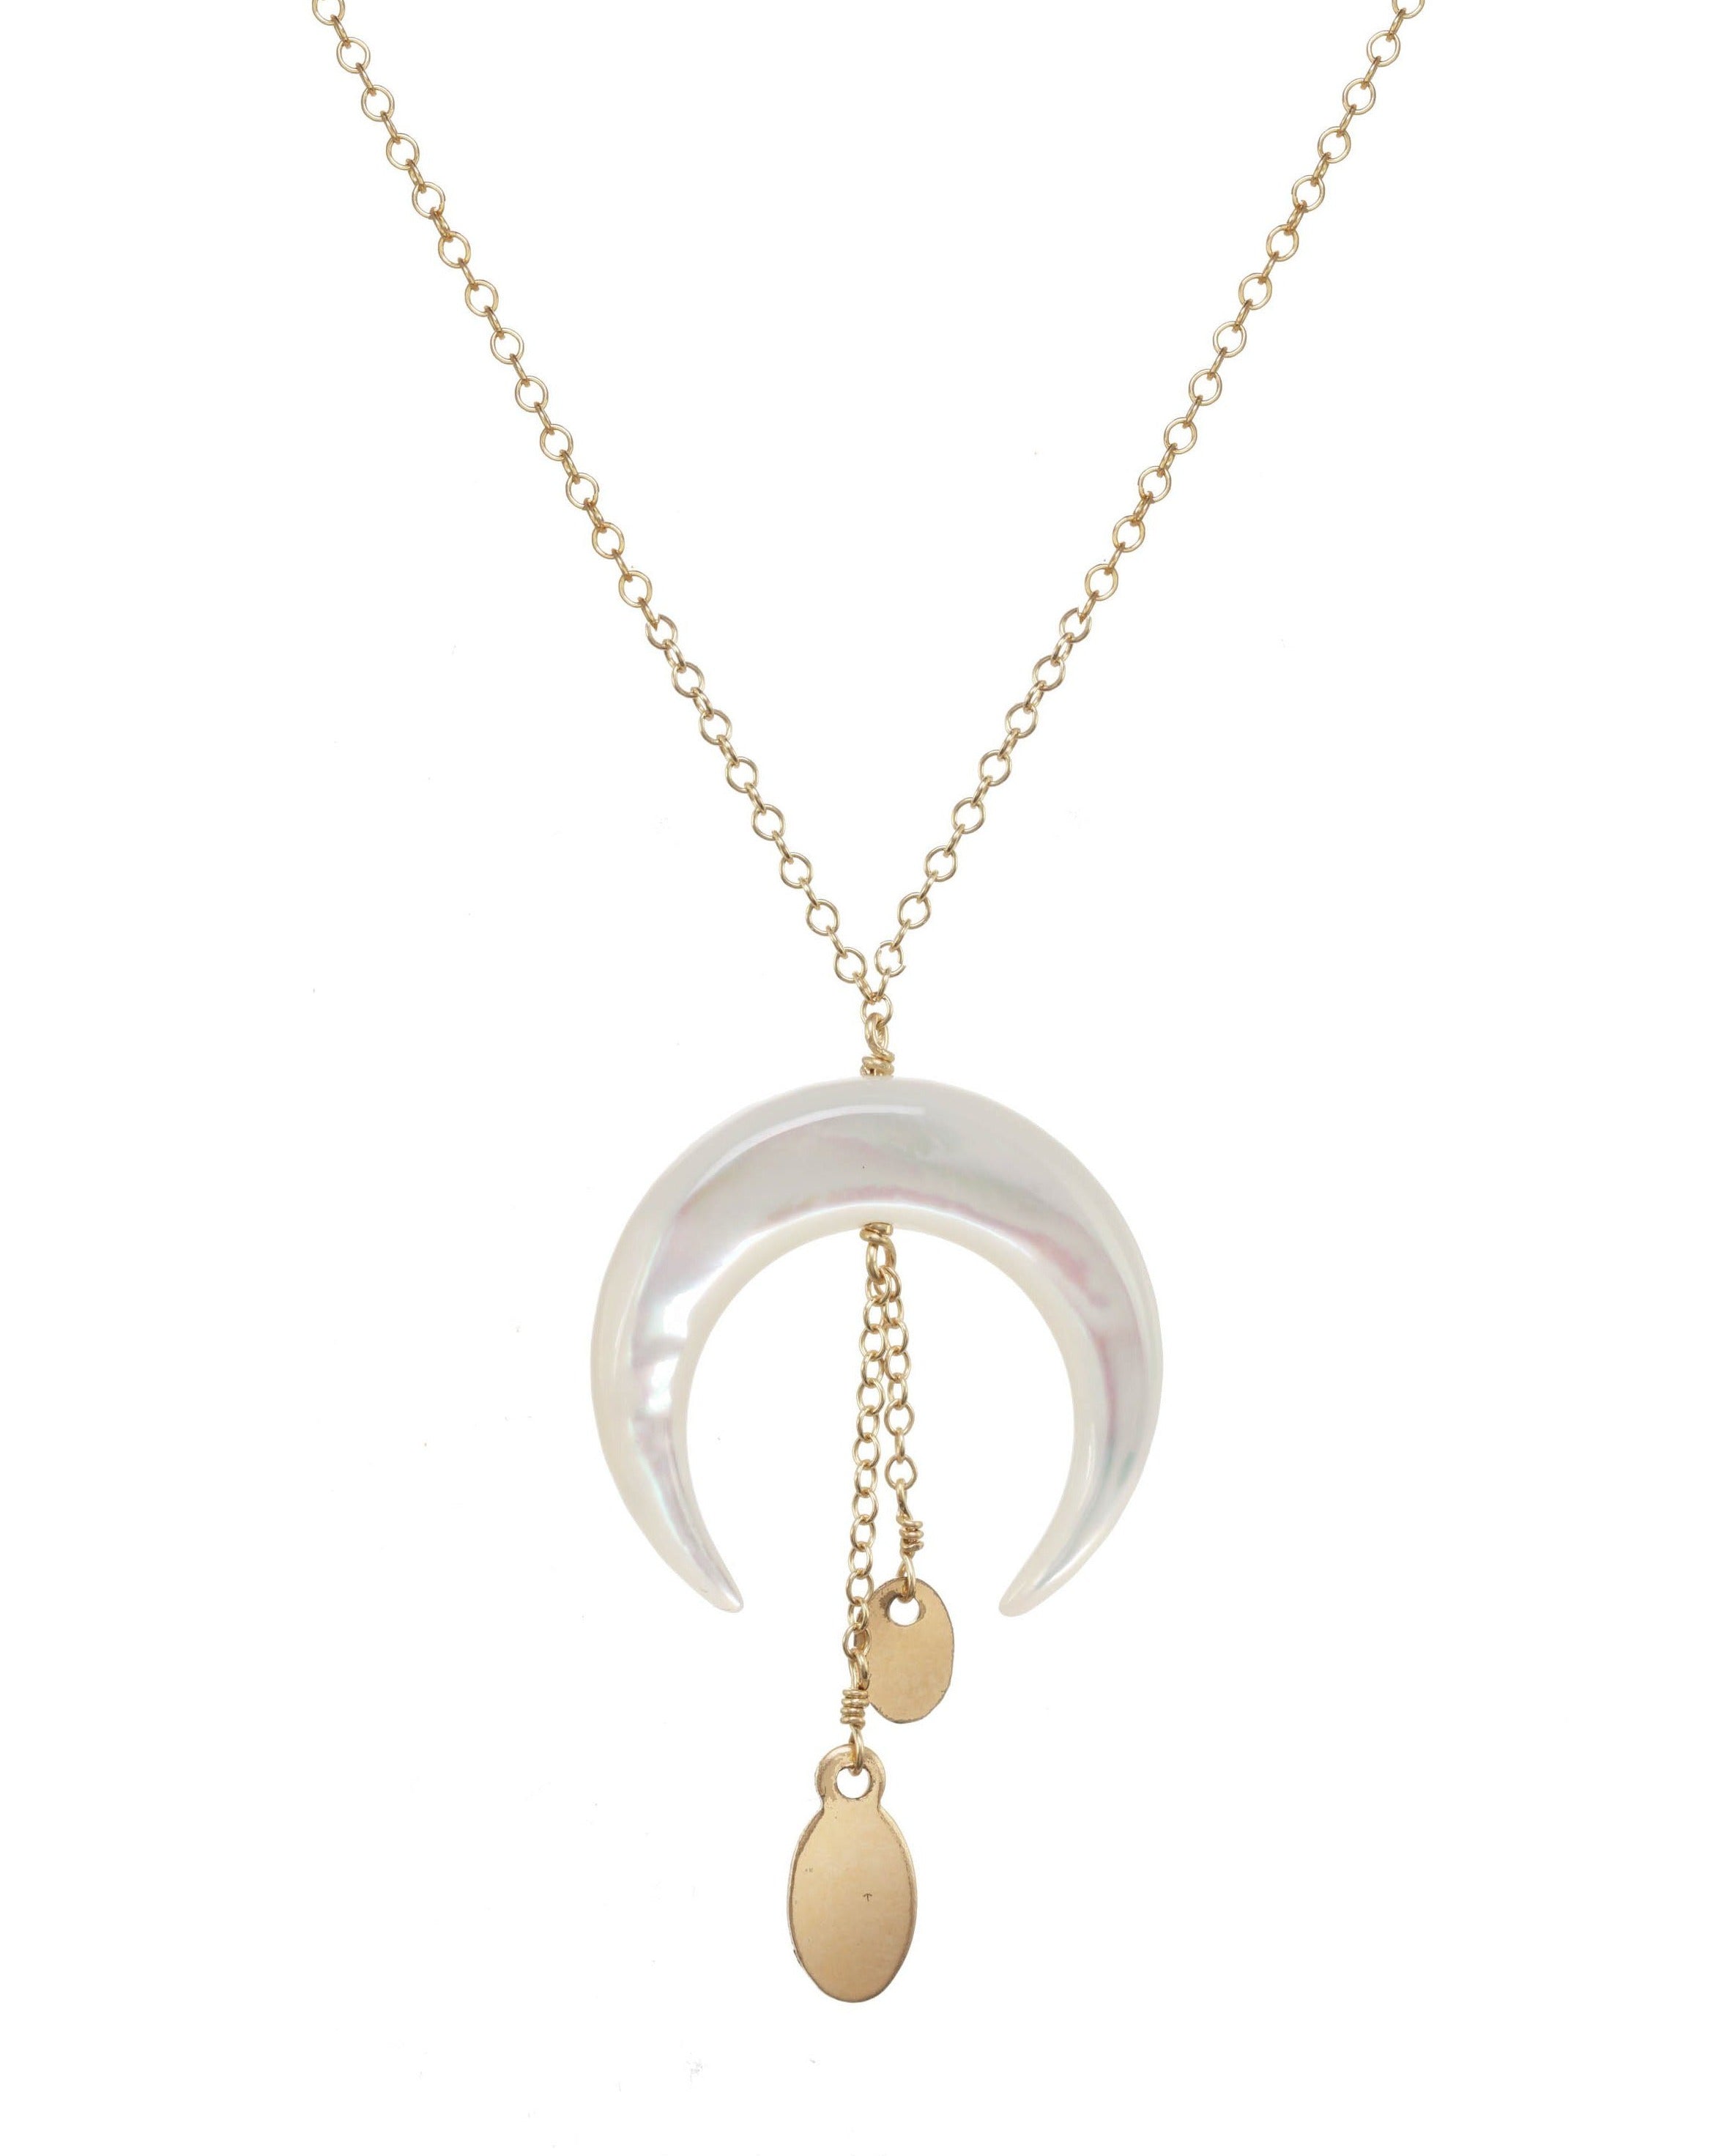 Baque Monita Necklace by KOZAKH. A 16 to 18 inch adjustable length necklace in 14K Gold Filled, featuring a hand-carved Mother of Pearl moon charm and a 1/2 inch chain drop.